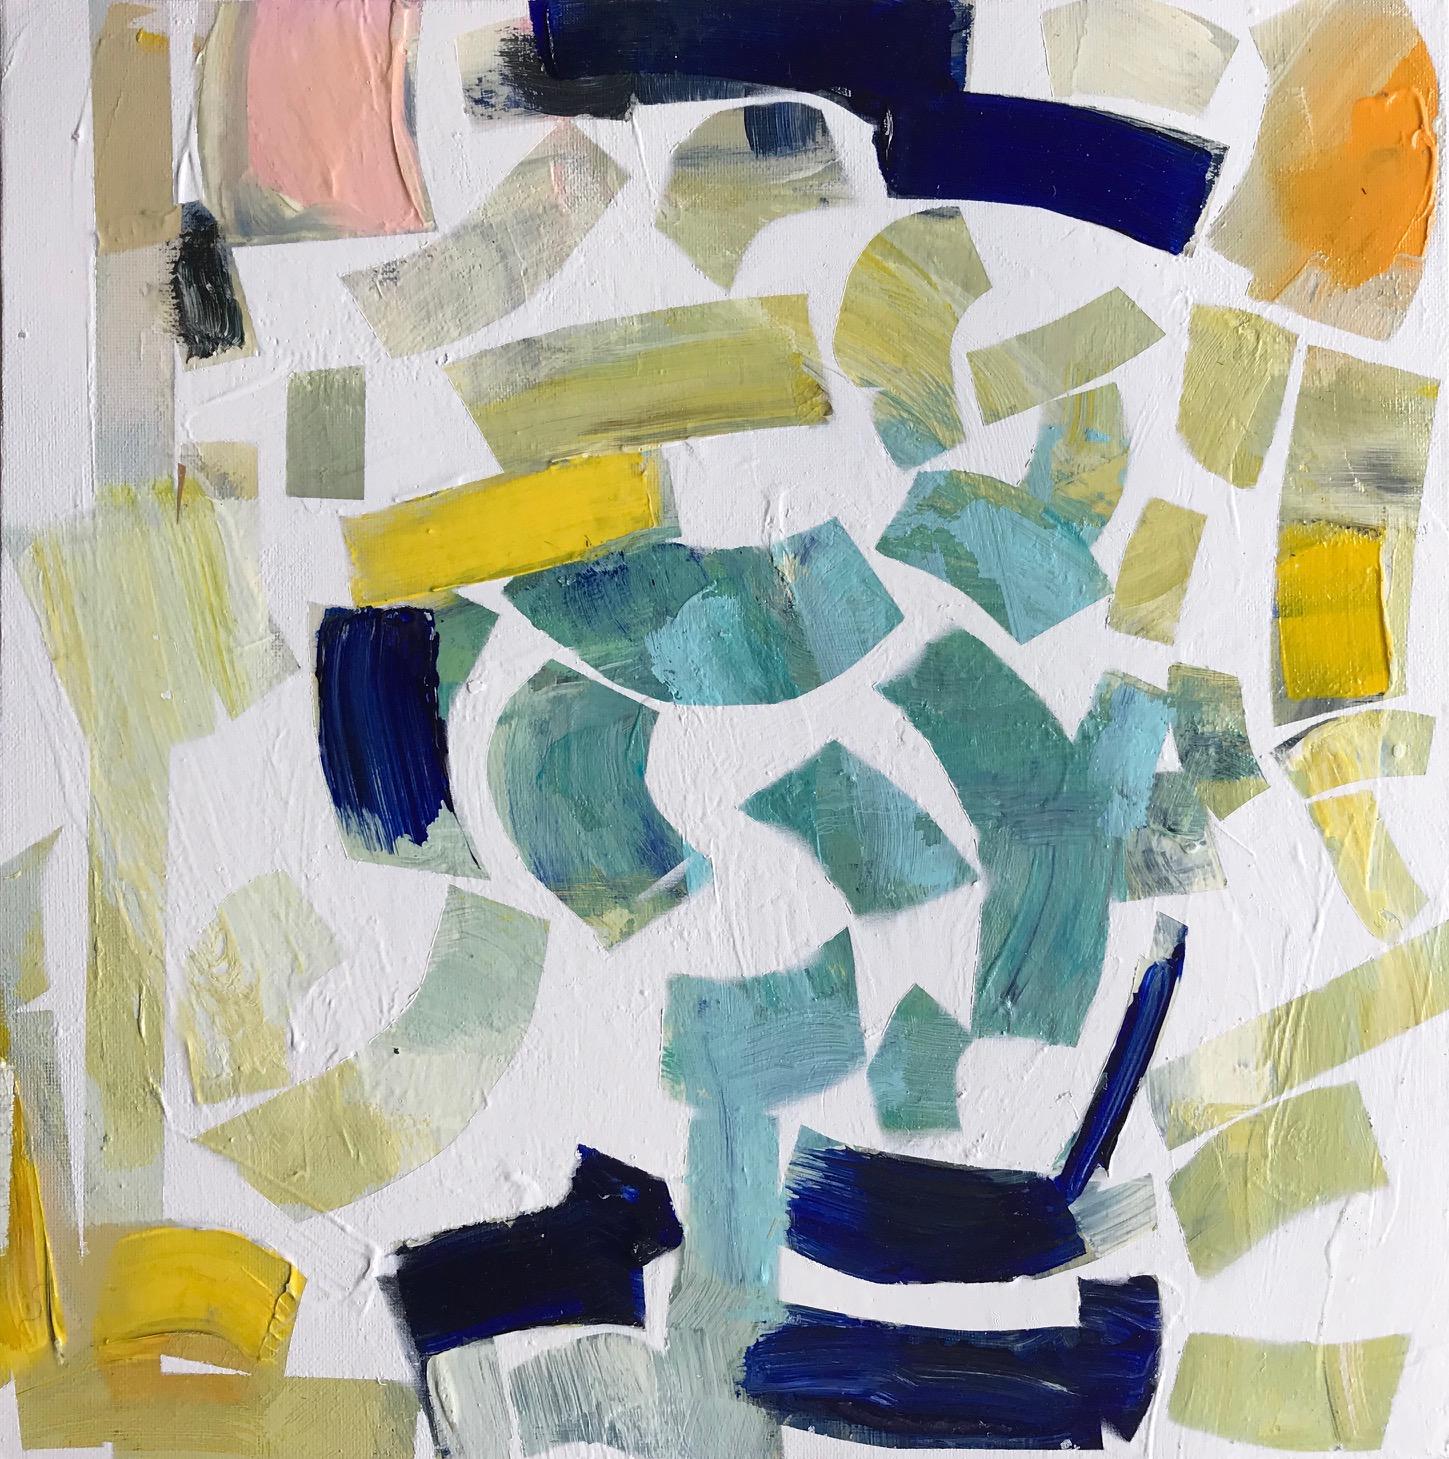 Victoria Harrison  Interior Painting - Victoria Harrison, Spring Leaves, Original Abstract Modern Painting   